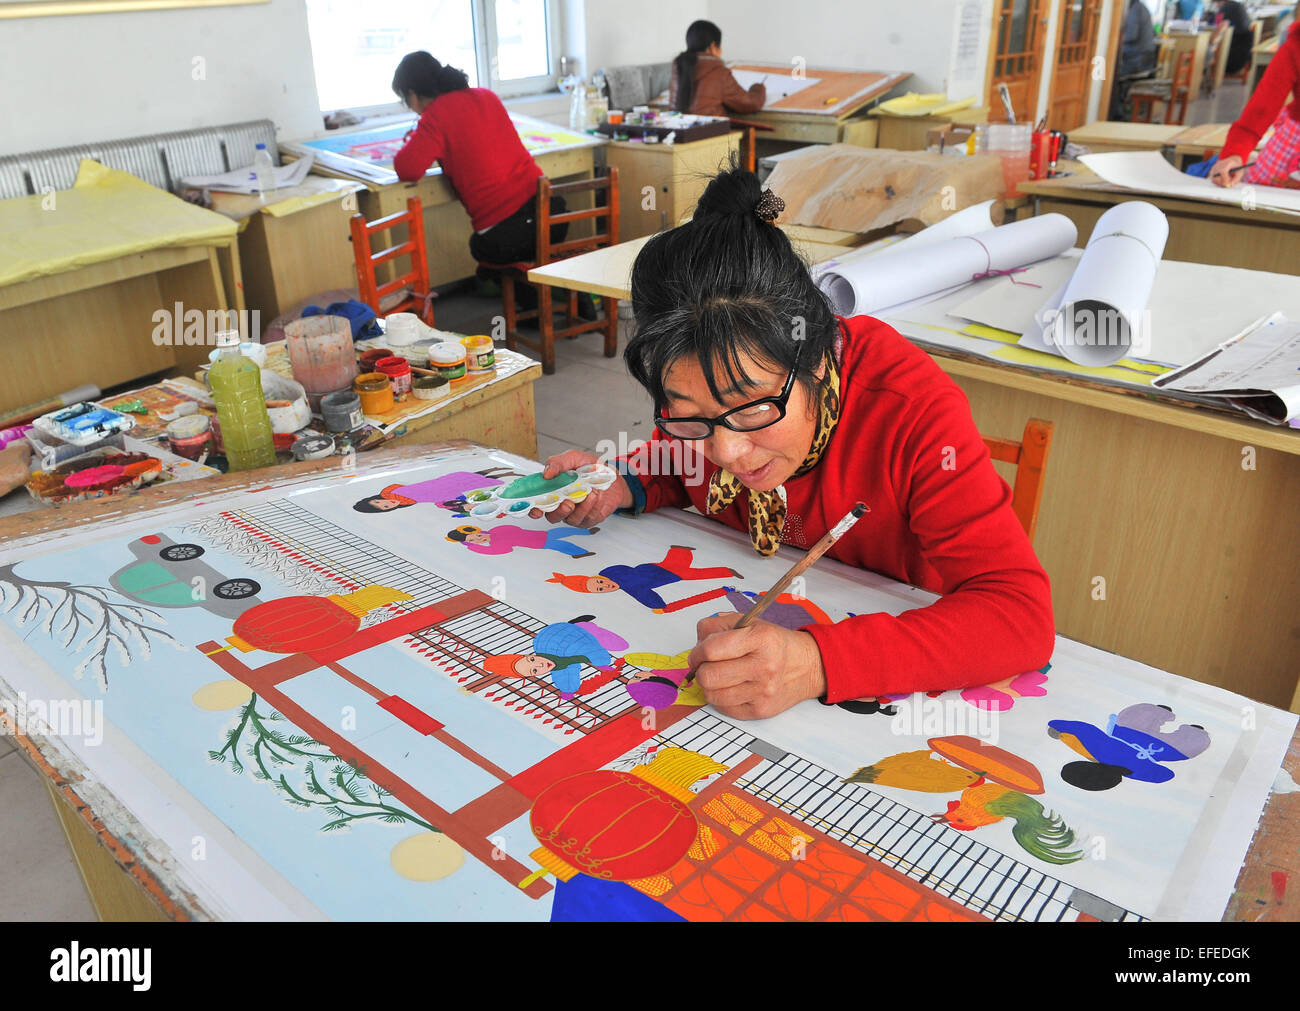 Dongfeng, China's Jilin Province. 2nd Feb, 2015. A country folk painting artisan works on a painting in Dongfeng County, northeast China's Jilin Province, Feb. 2, 2015. The country folk painting of Dongfeng, which has the reputation as China's 'town of country folk painting', is famous for its strong local flavor in depicting life and folk-customs of northeast China's rural area. © Zhao Mengzhuo/Xinhua/Alamy Live News Stock Photo